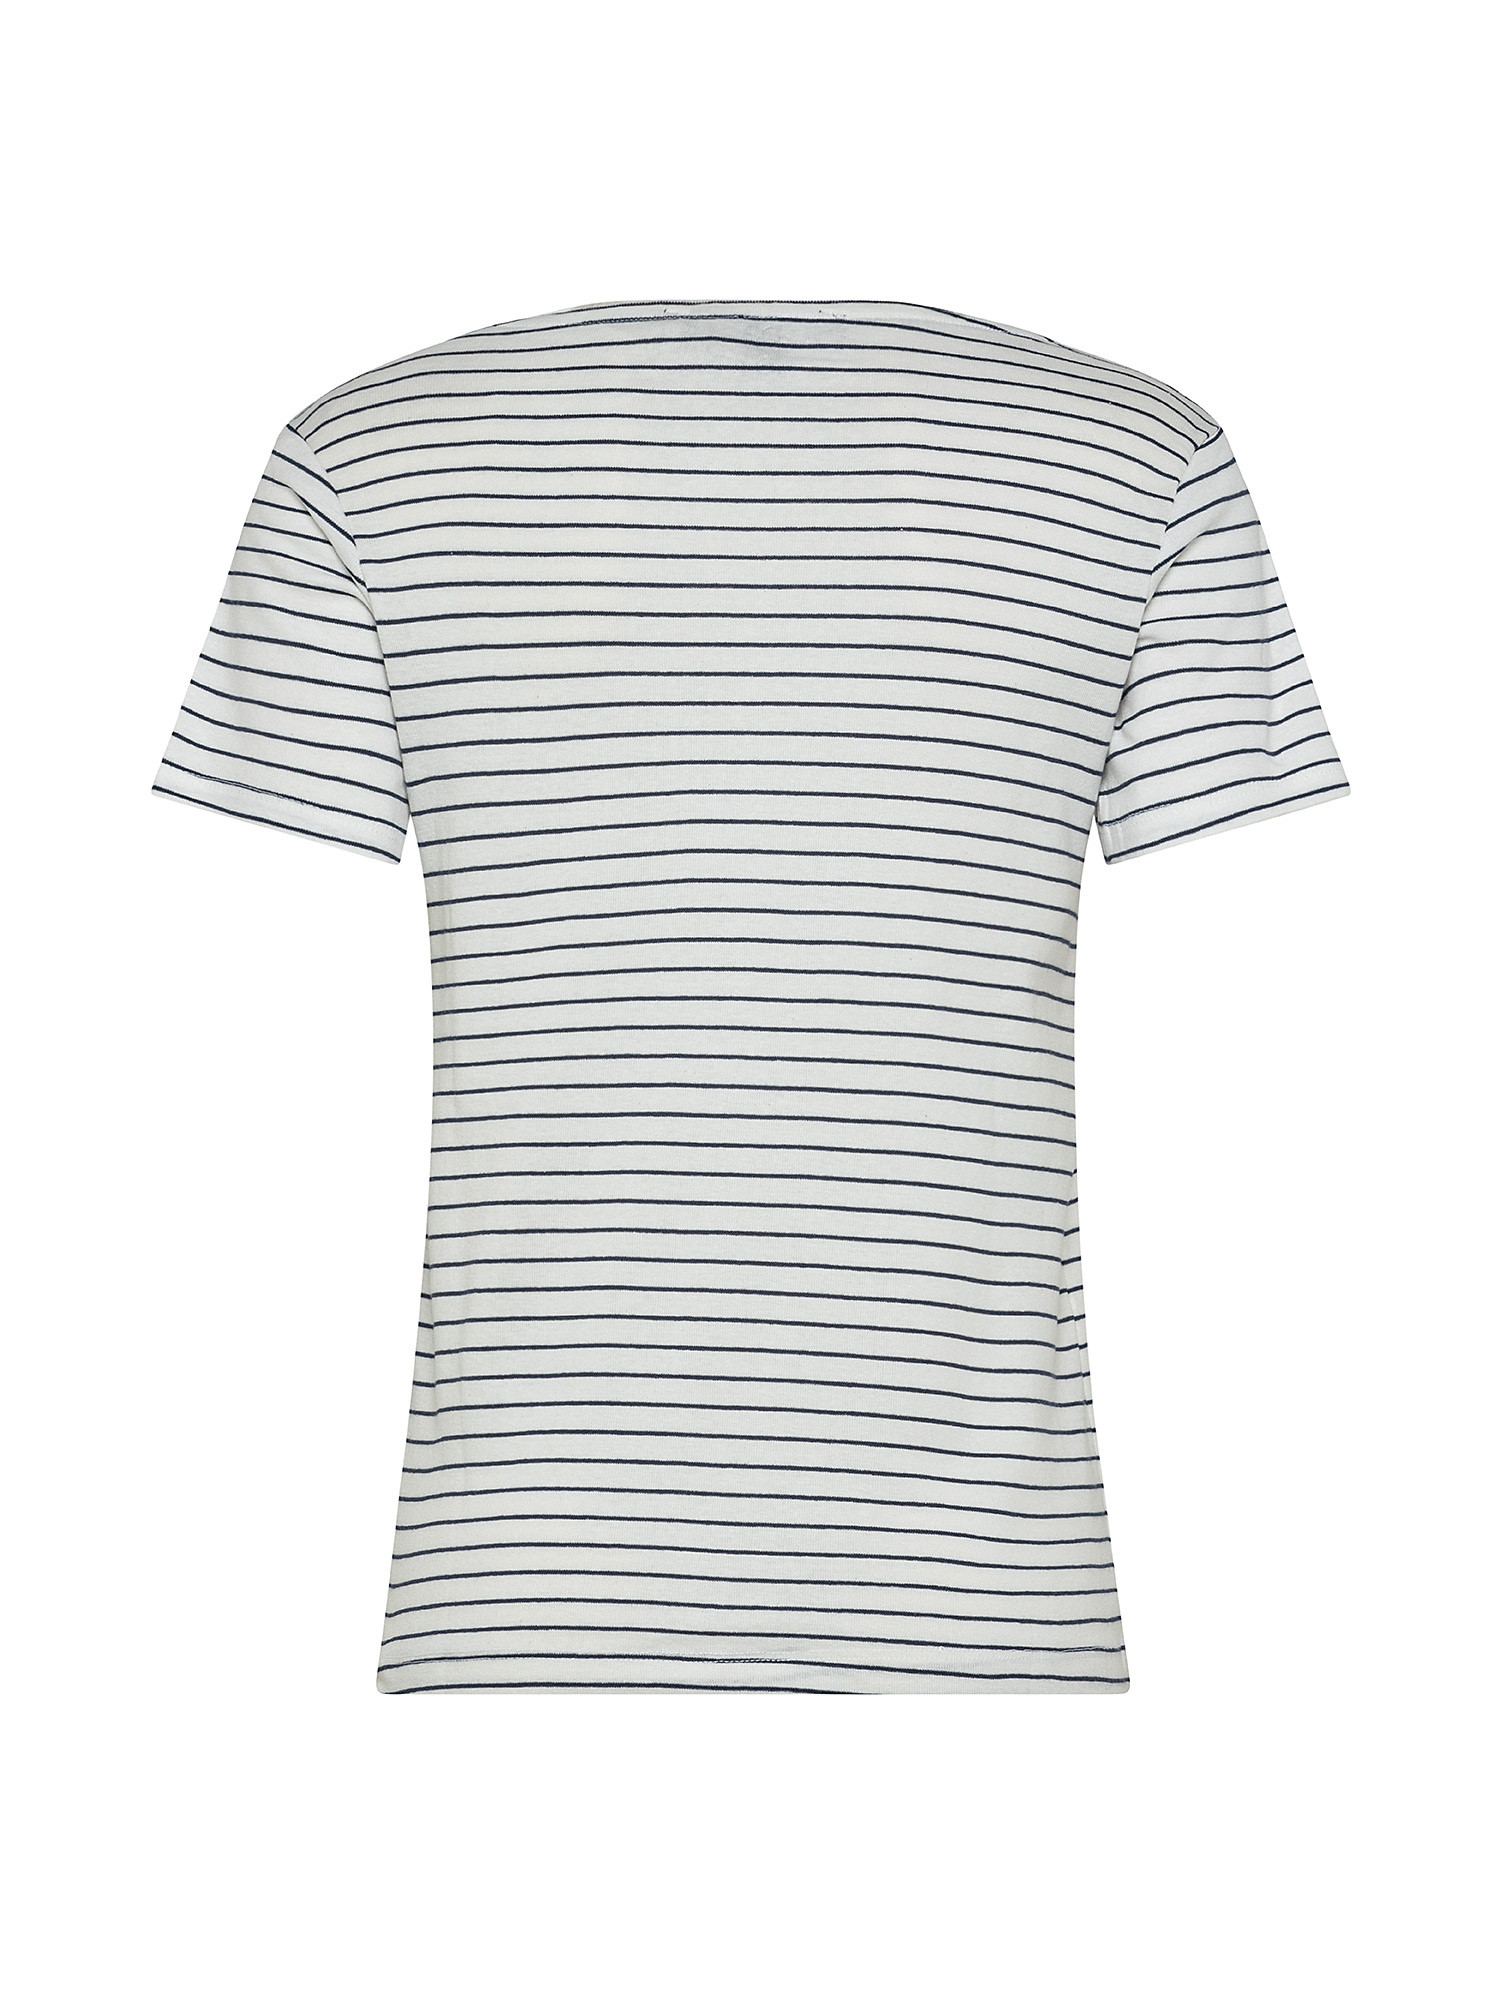 Striped T-shirt, White, large image number 1